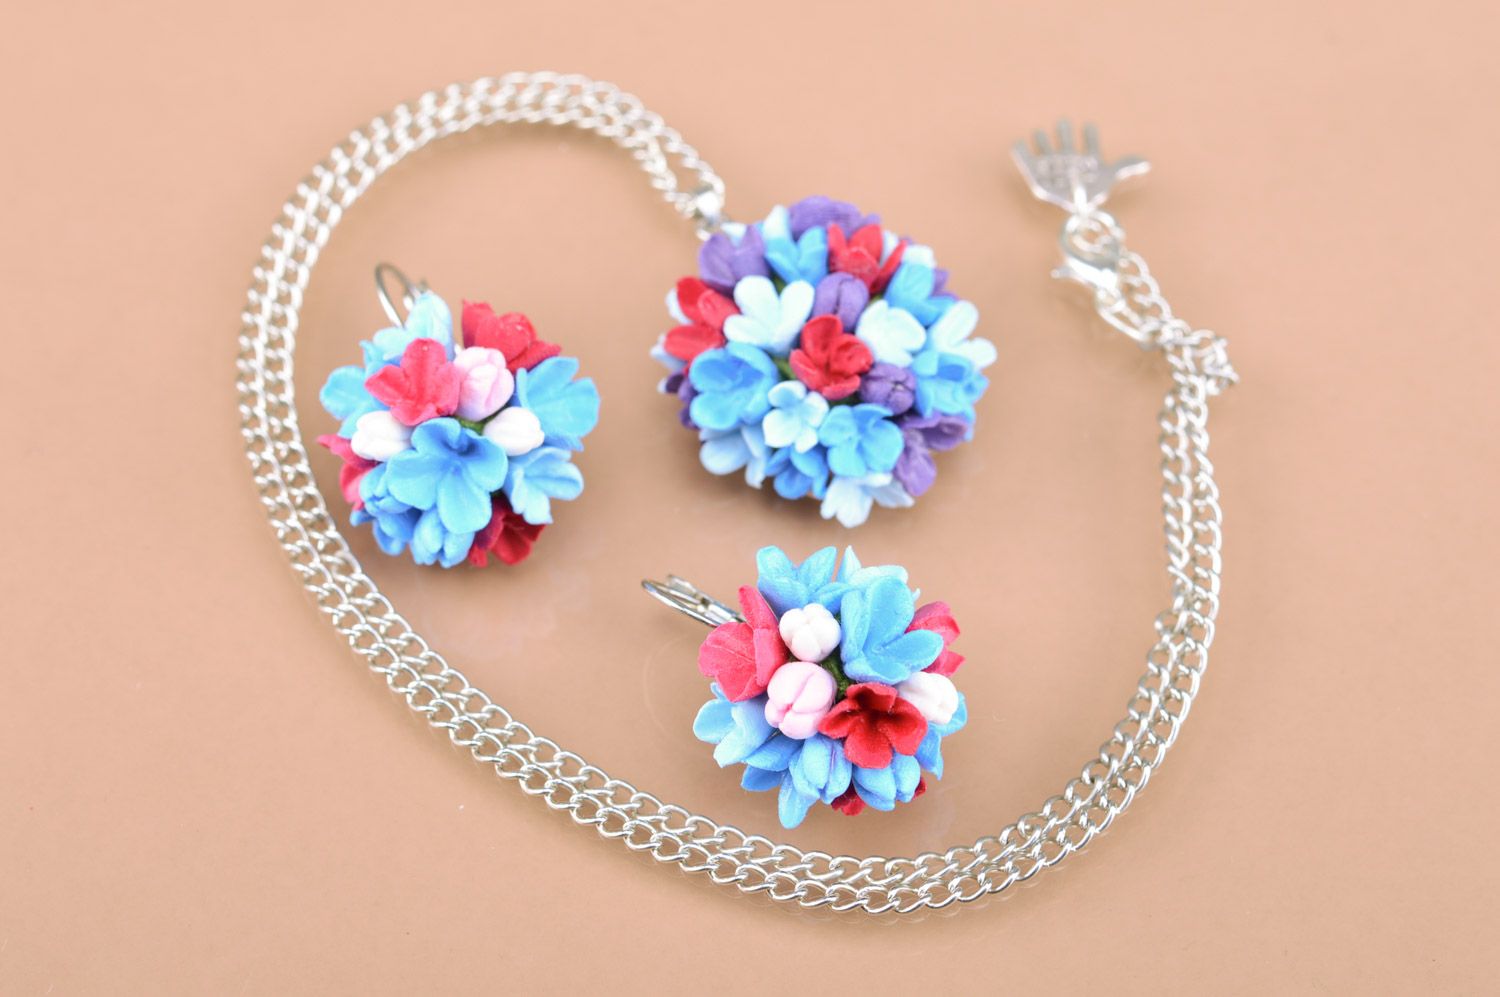 Handmade polymer clay jewelry set 2 items flower earrings and pendant with chain photo 1